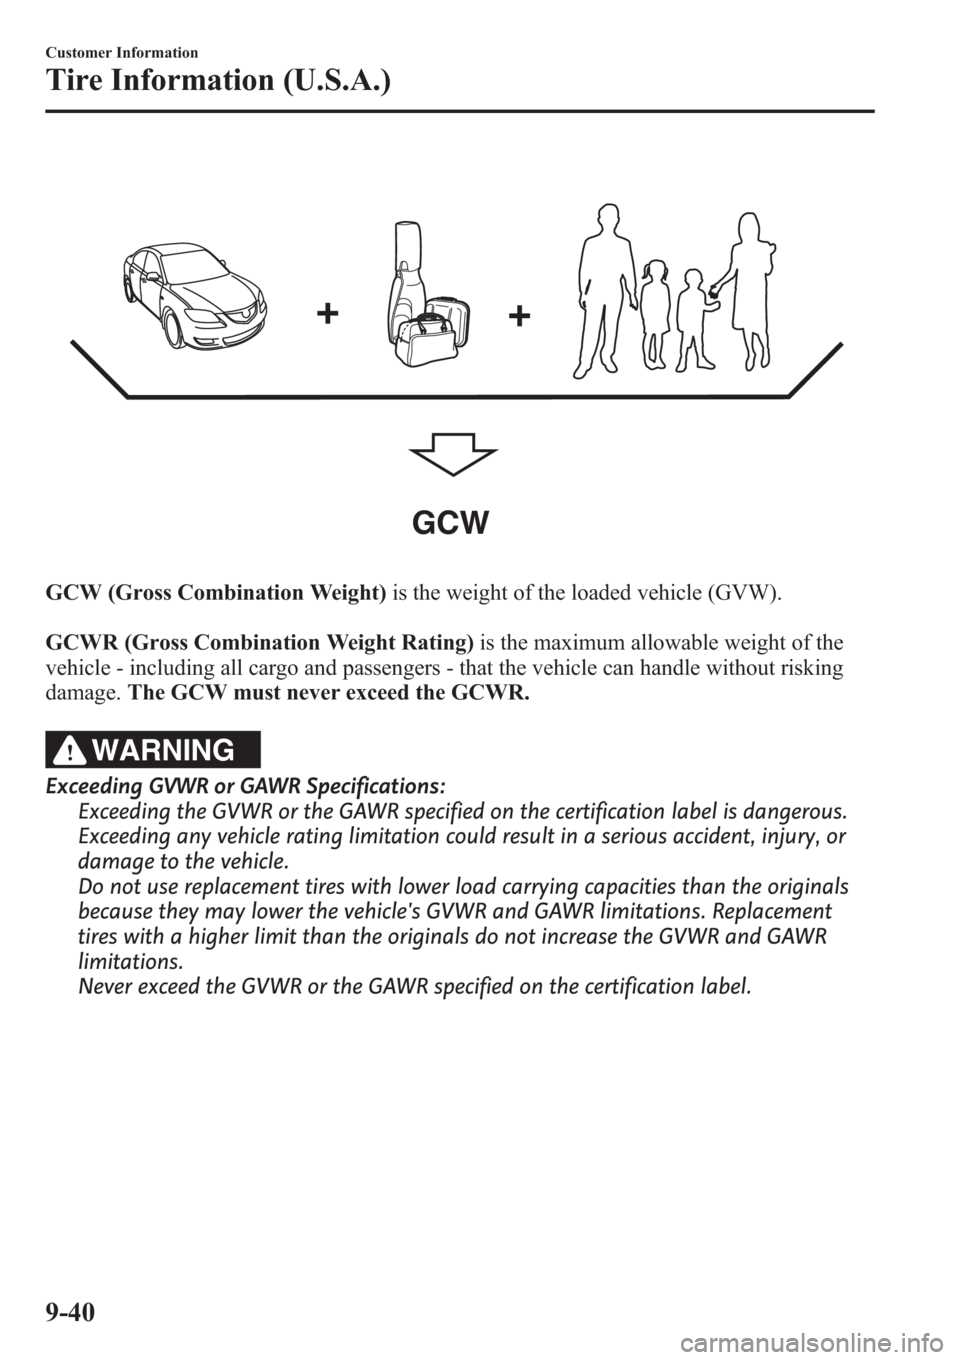 MAZDA MODEL 3 HATCHBACK 2013  Owners Manual (in English) GCW
GCW (Gross Combination Weight)is the weight of the loaded vehicle (GVW).
GCWR (Gross Combination Weight Rating)is the maximum allowable weight of the
vehicle - including all cargo and passengers -